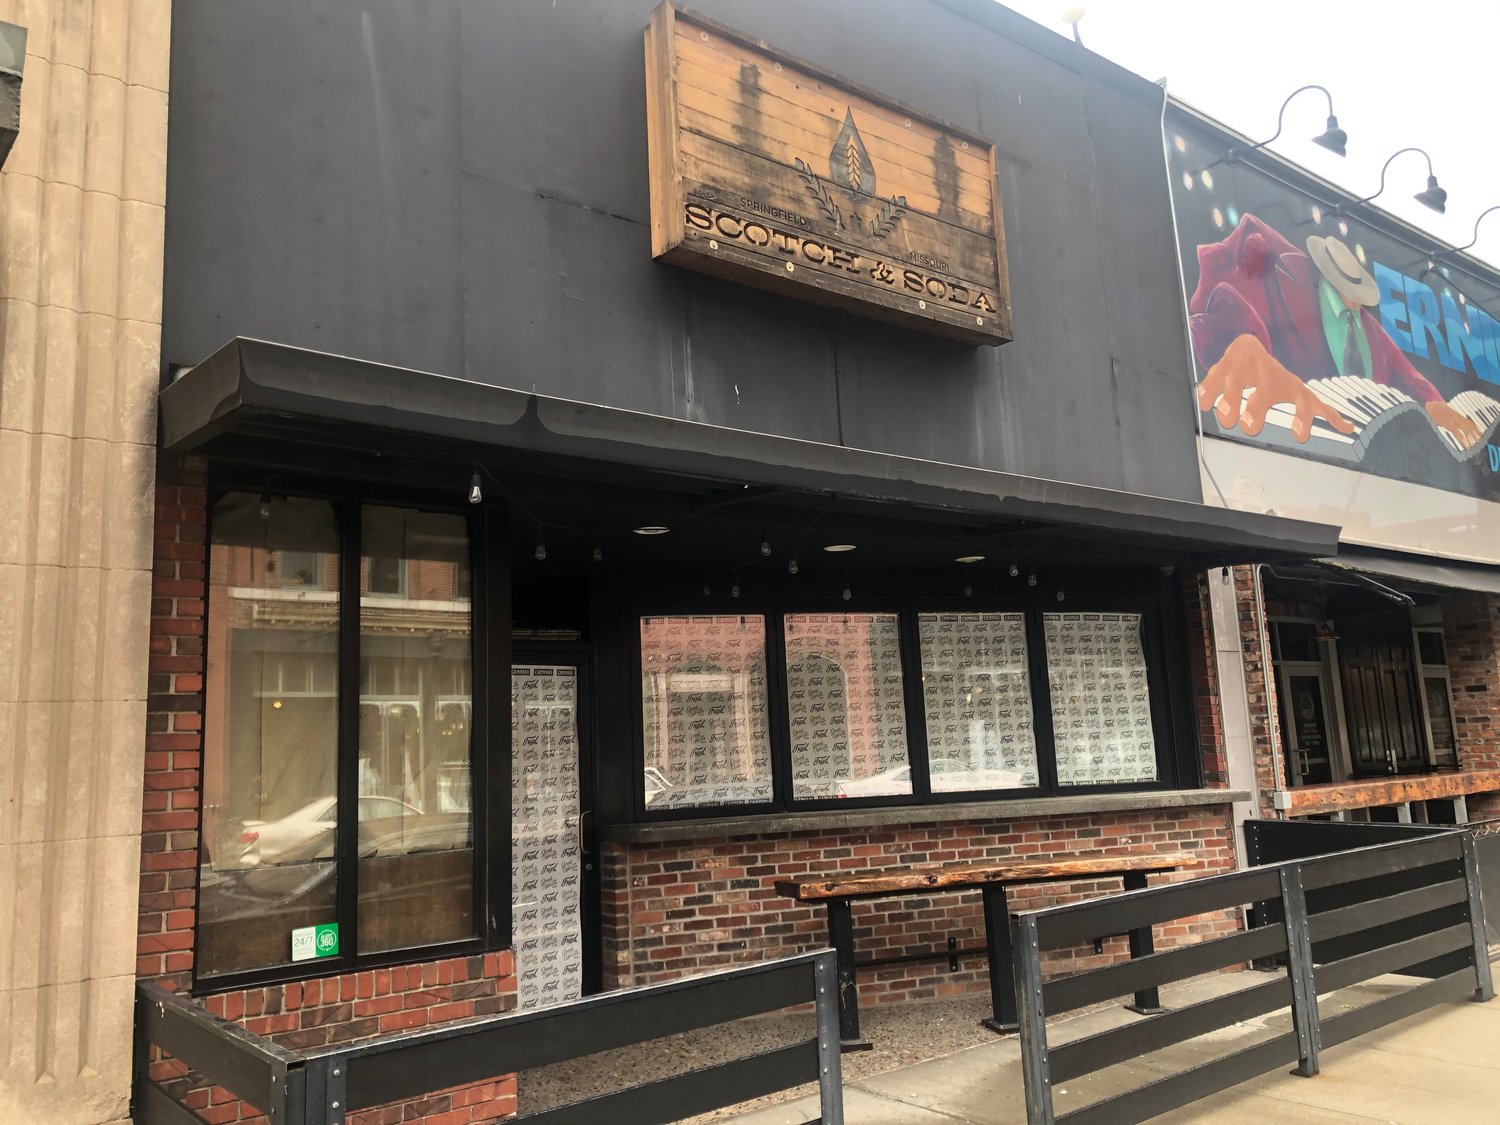 The site of Scotch & Soda next month is slated to become home to a concept called Sweet Boy's Neighborhood Bar.